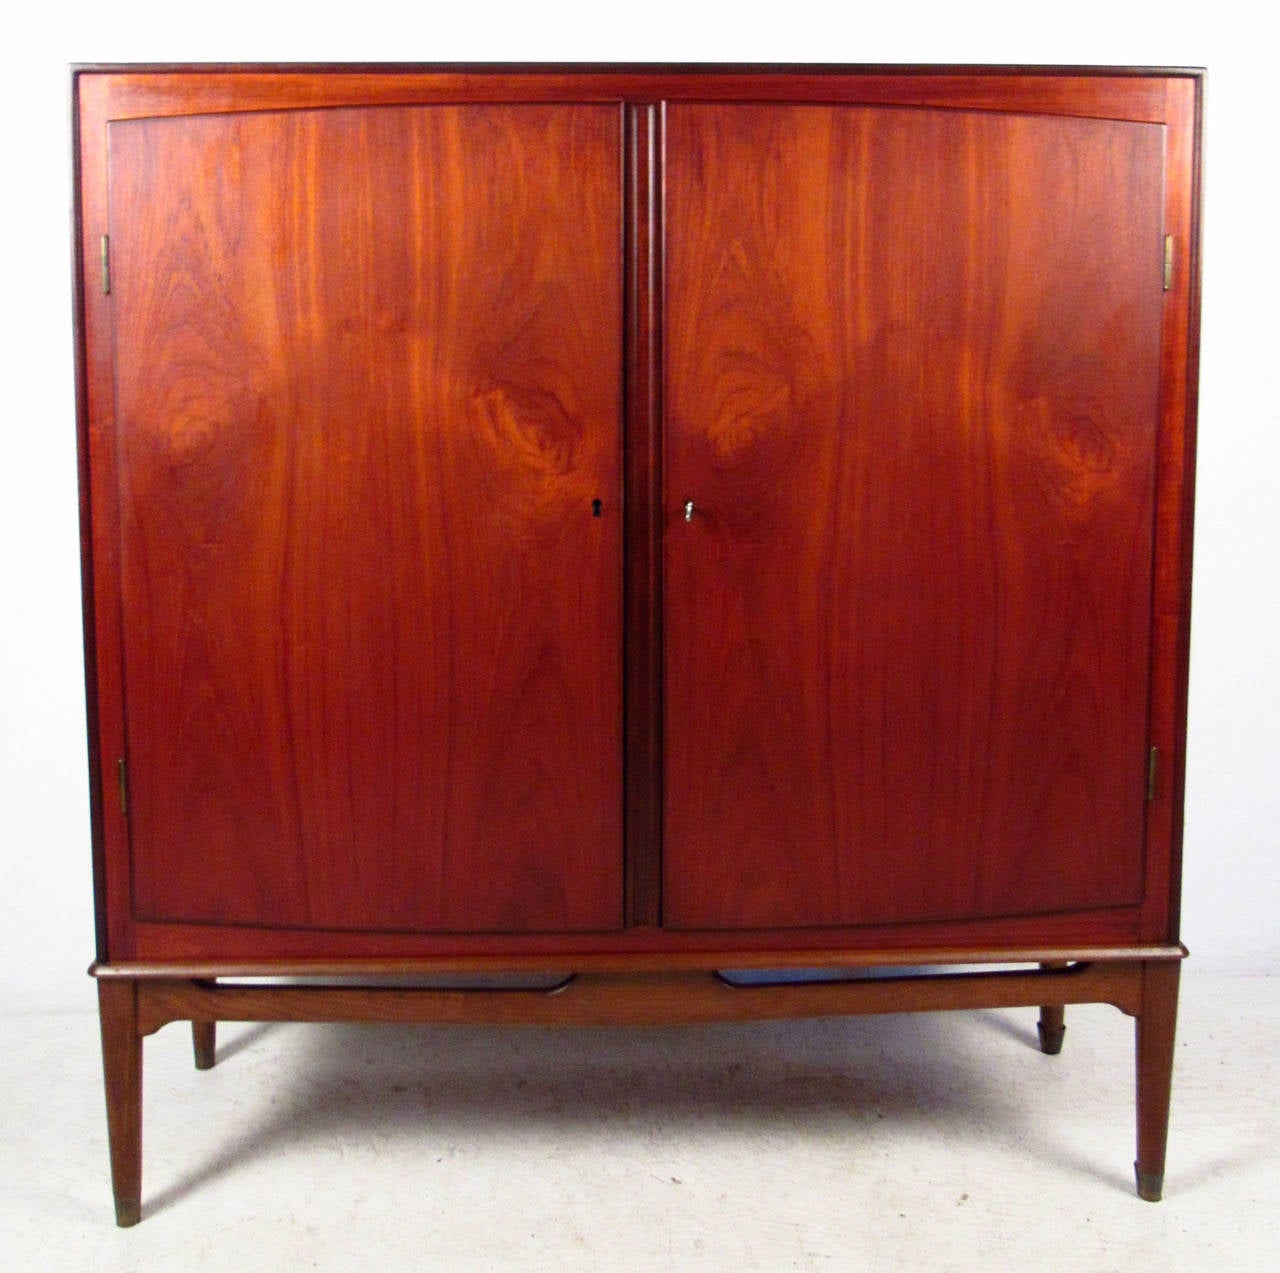 Vintage-modern tall teak cabinet, features beautifully sculpted base and two locking cabinet doors that reveal interior drawers and shelving. Stunning mid-century teak showcases Scandinavian modern design and quality craftsmanship. Ideal bedroom